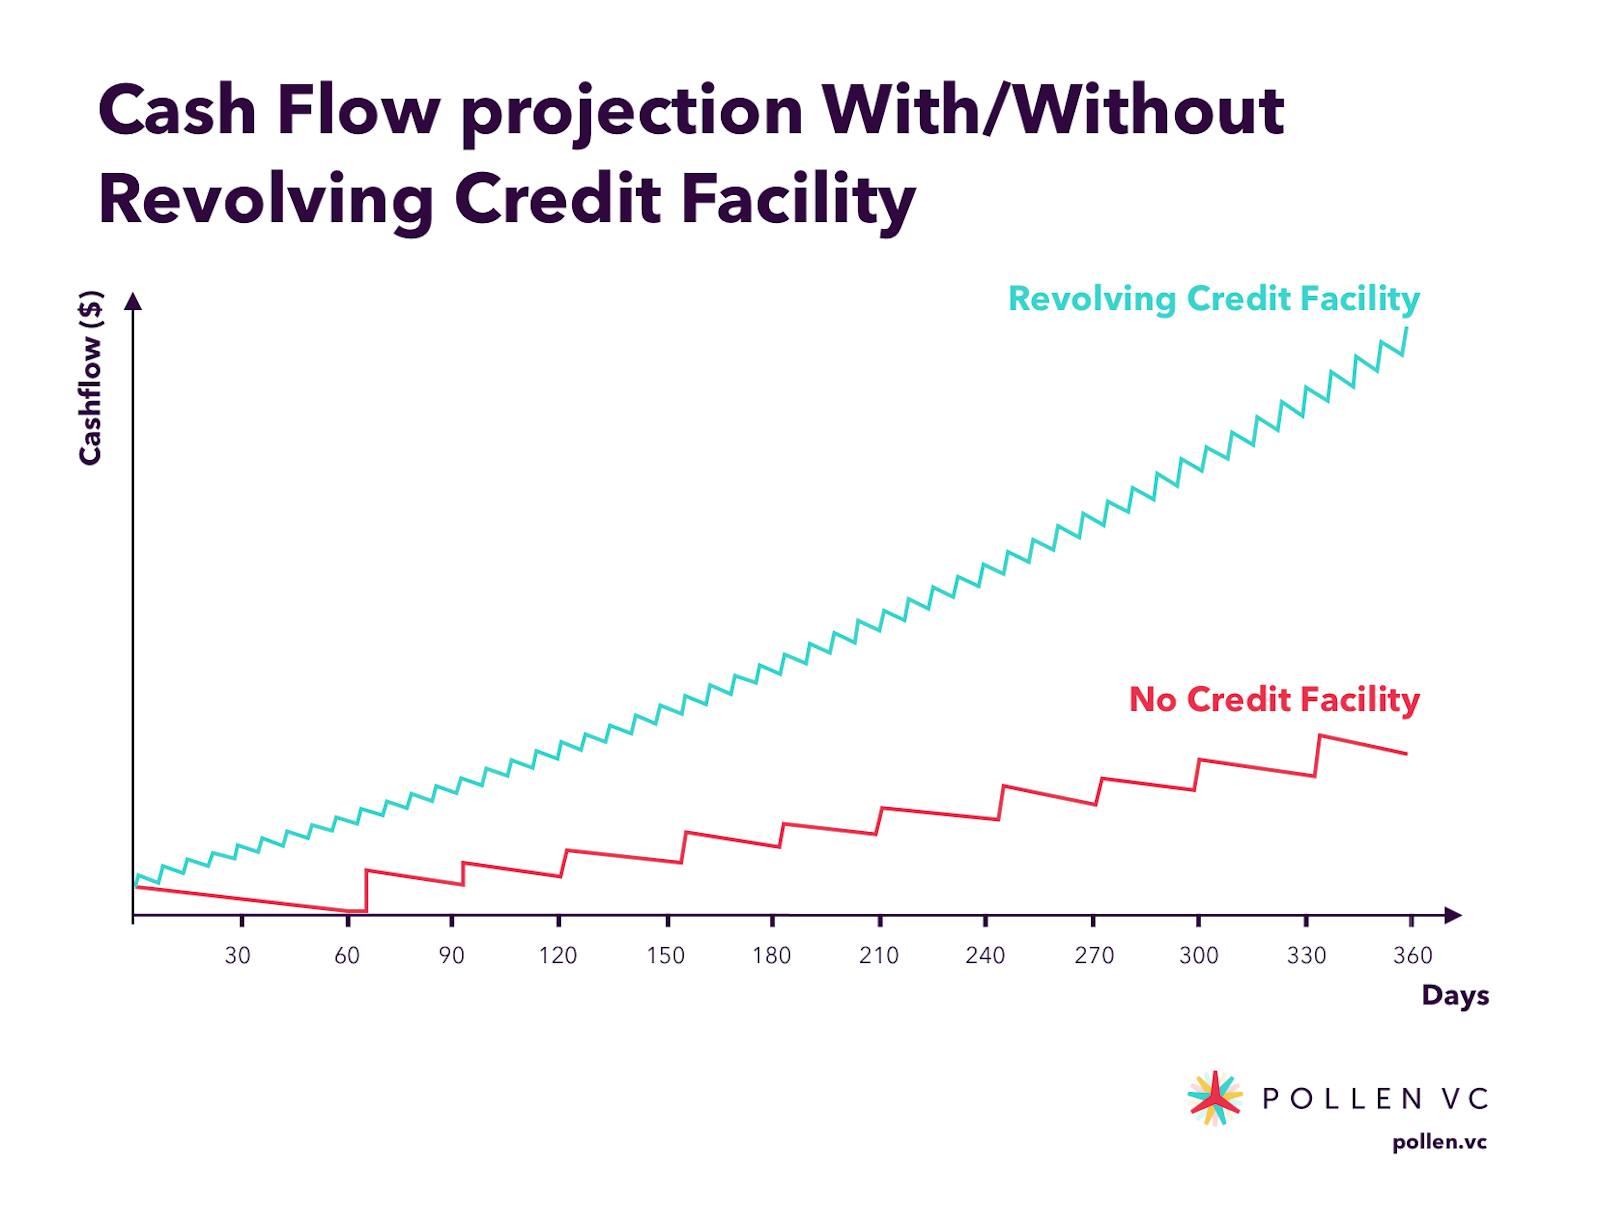 Cash flow projection with/without a revolving credit facility